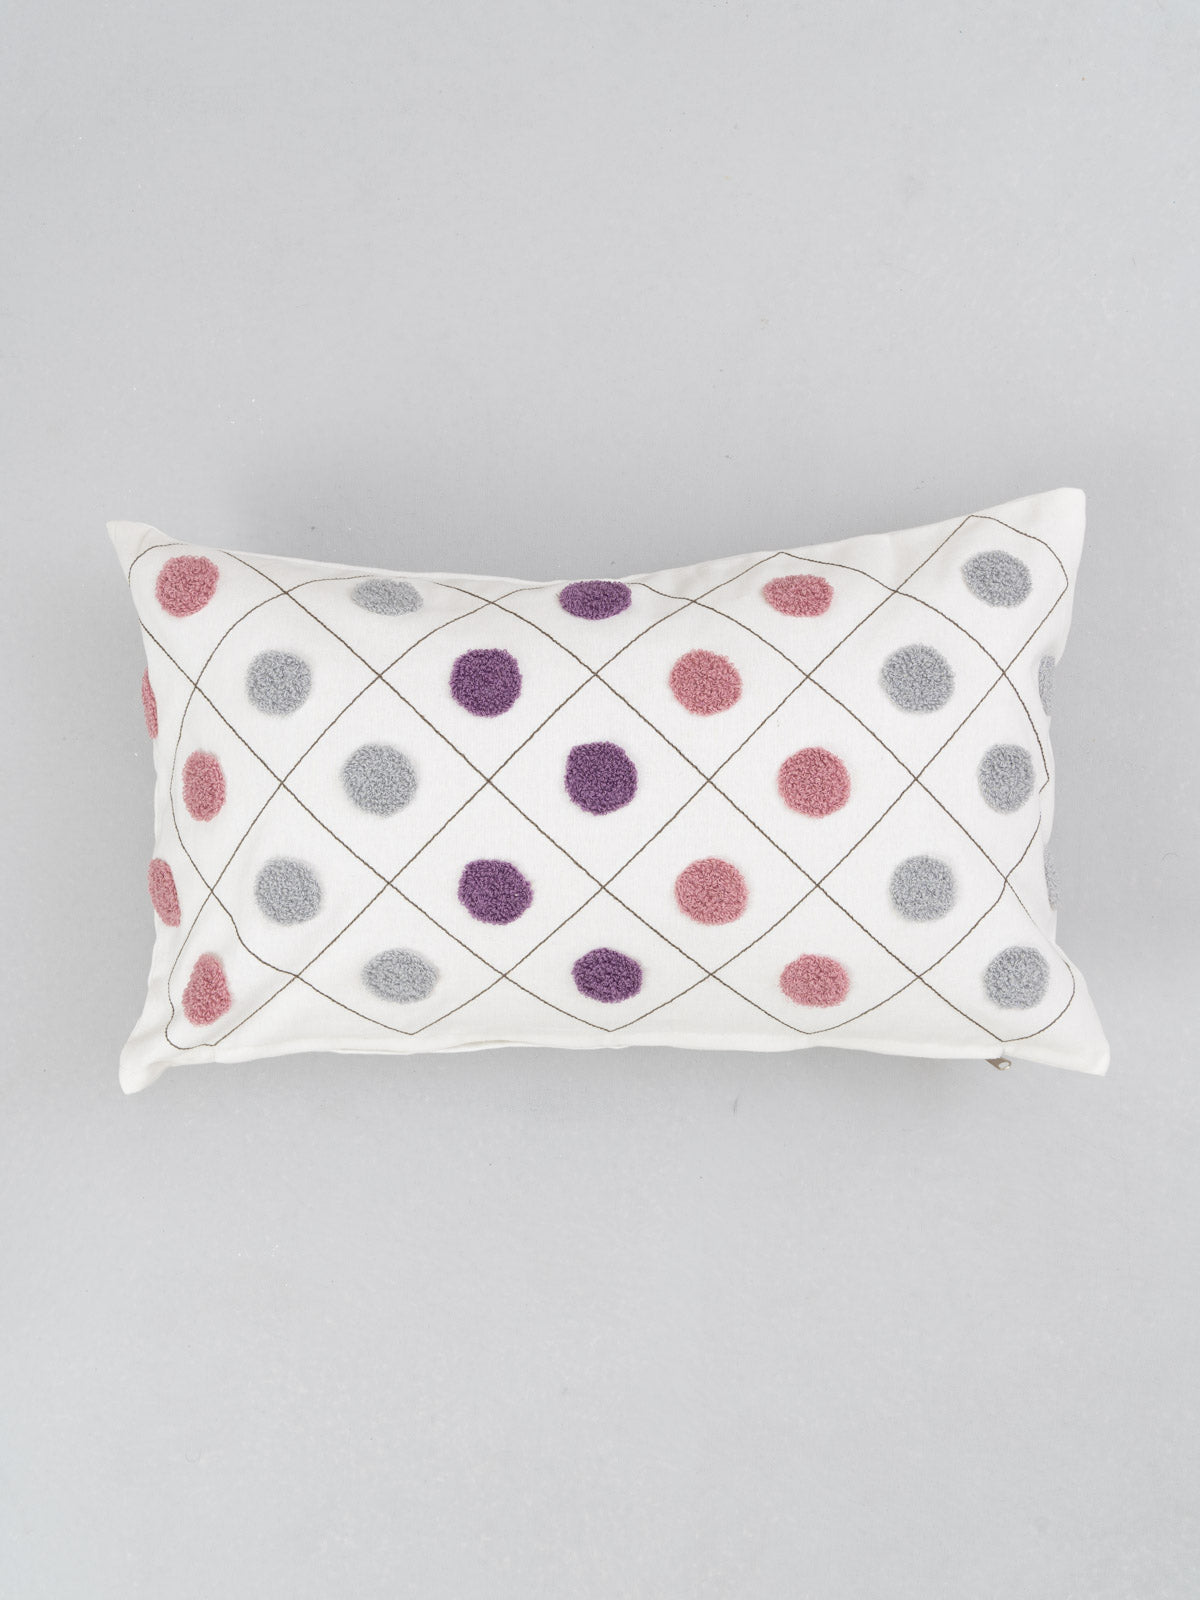 Whimsical Garden 16", Dainty Dots In Lavender 12" X 20", Grape Solid 16", Tasseled 16" Set Of 4 Combo Cotton Cushion Cover - Lavender